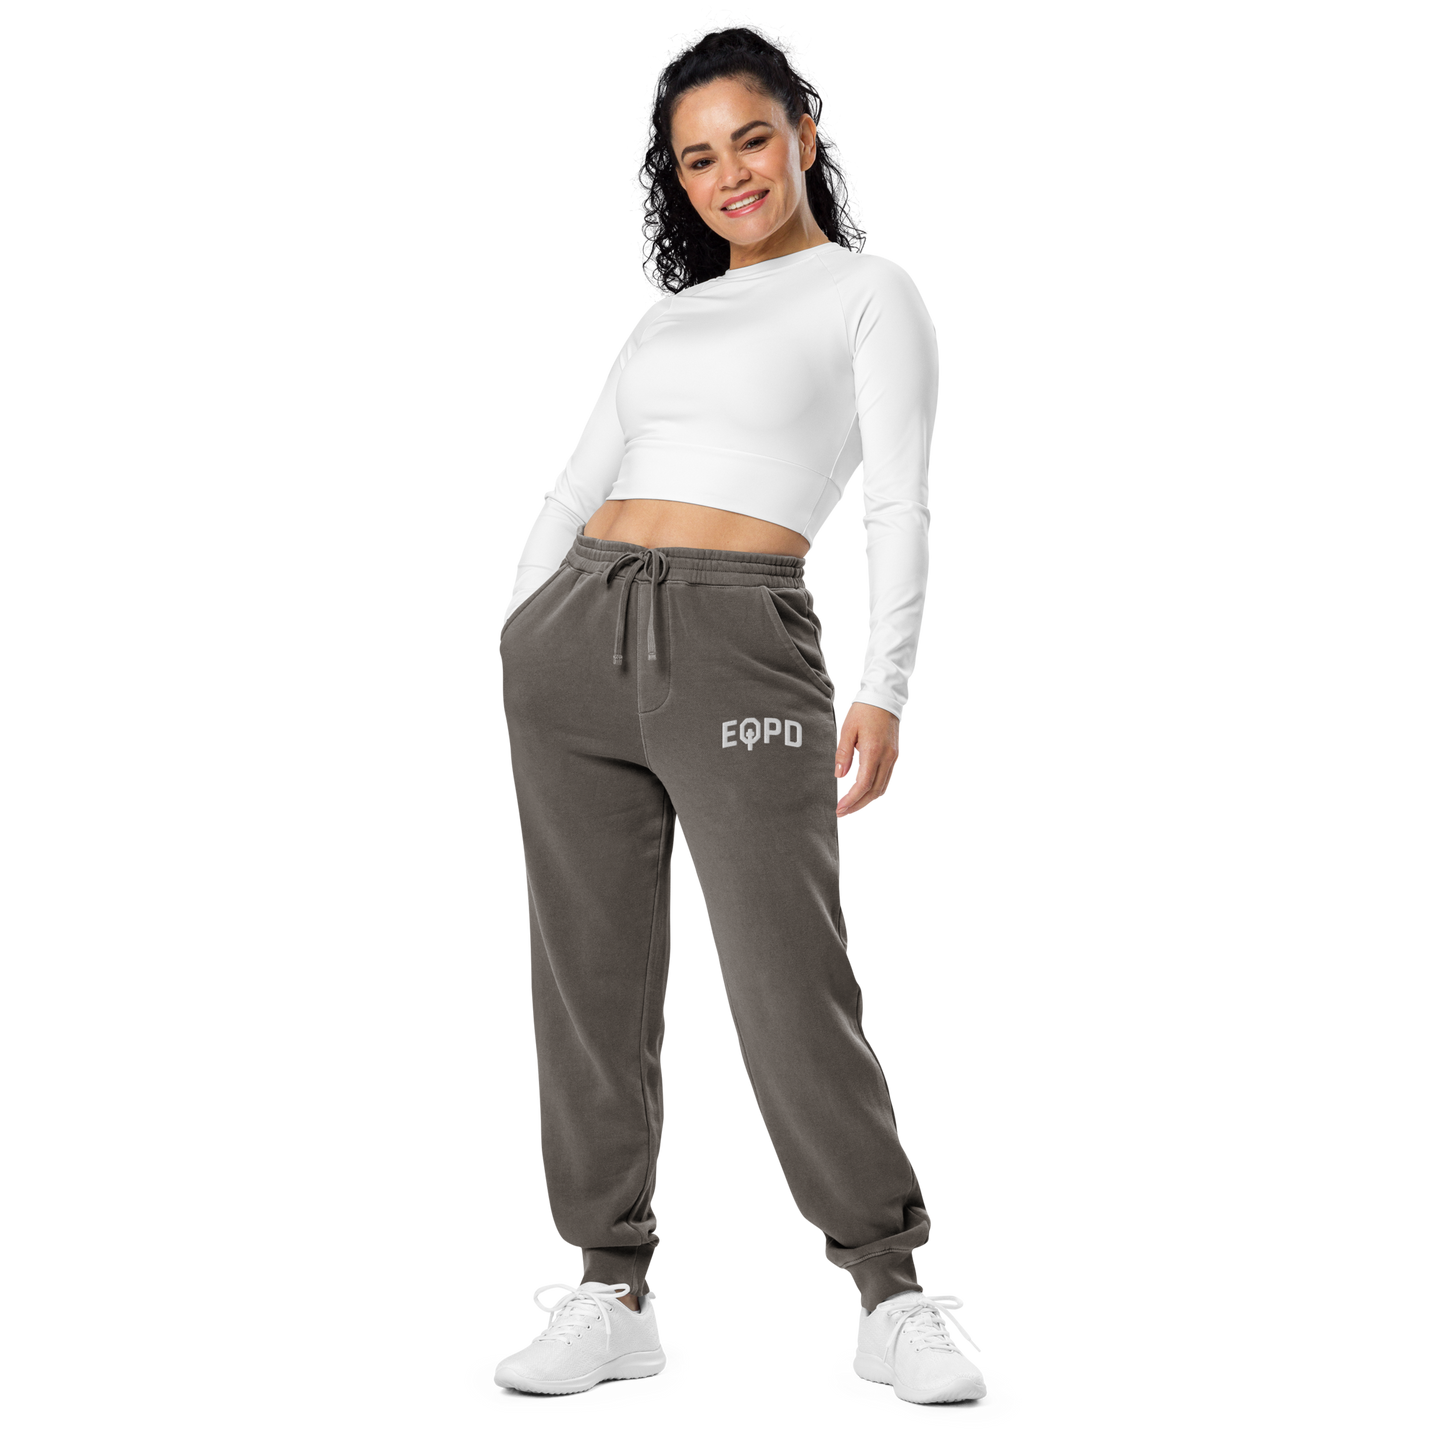 EQPD Oversized Washed-out Sweatpants